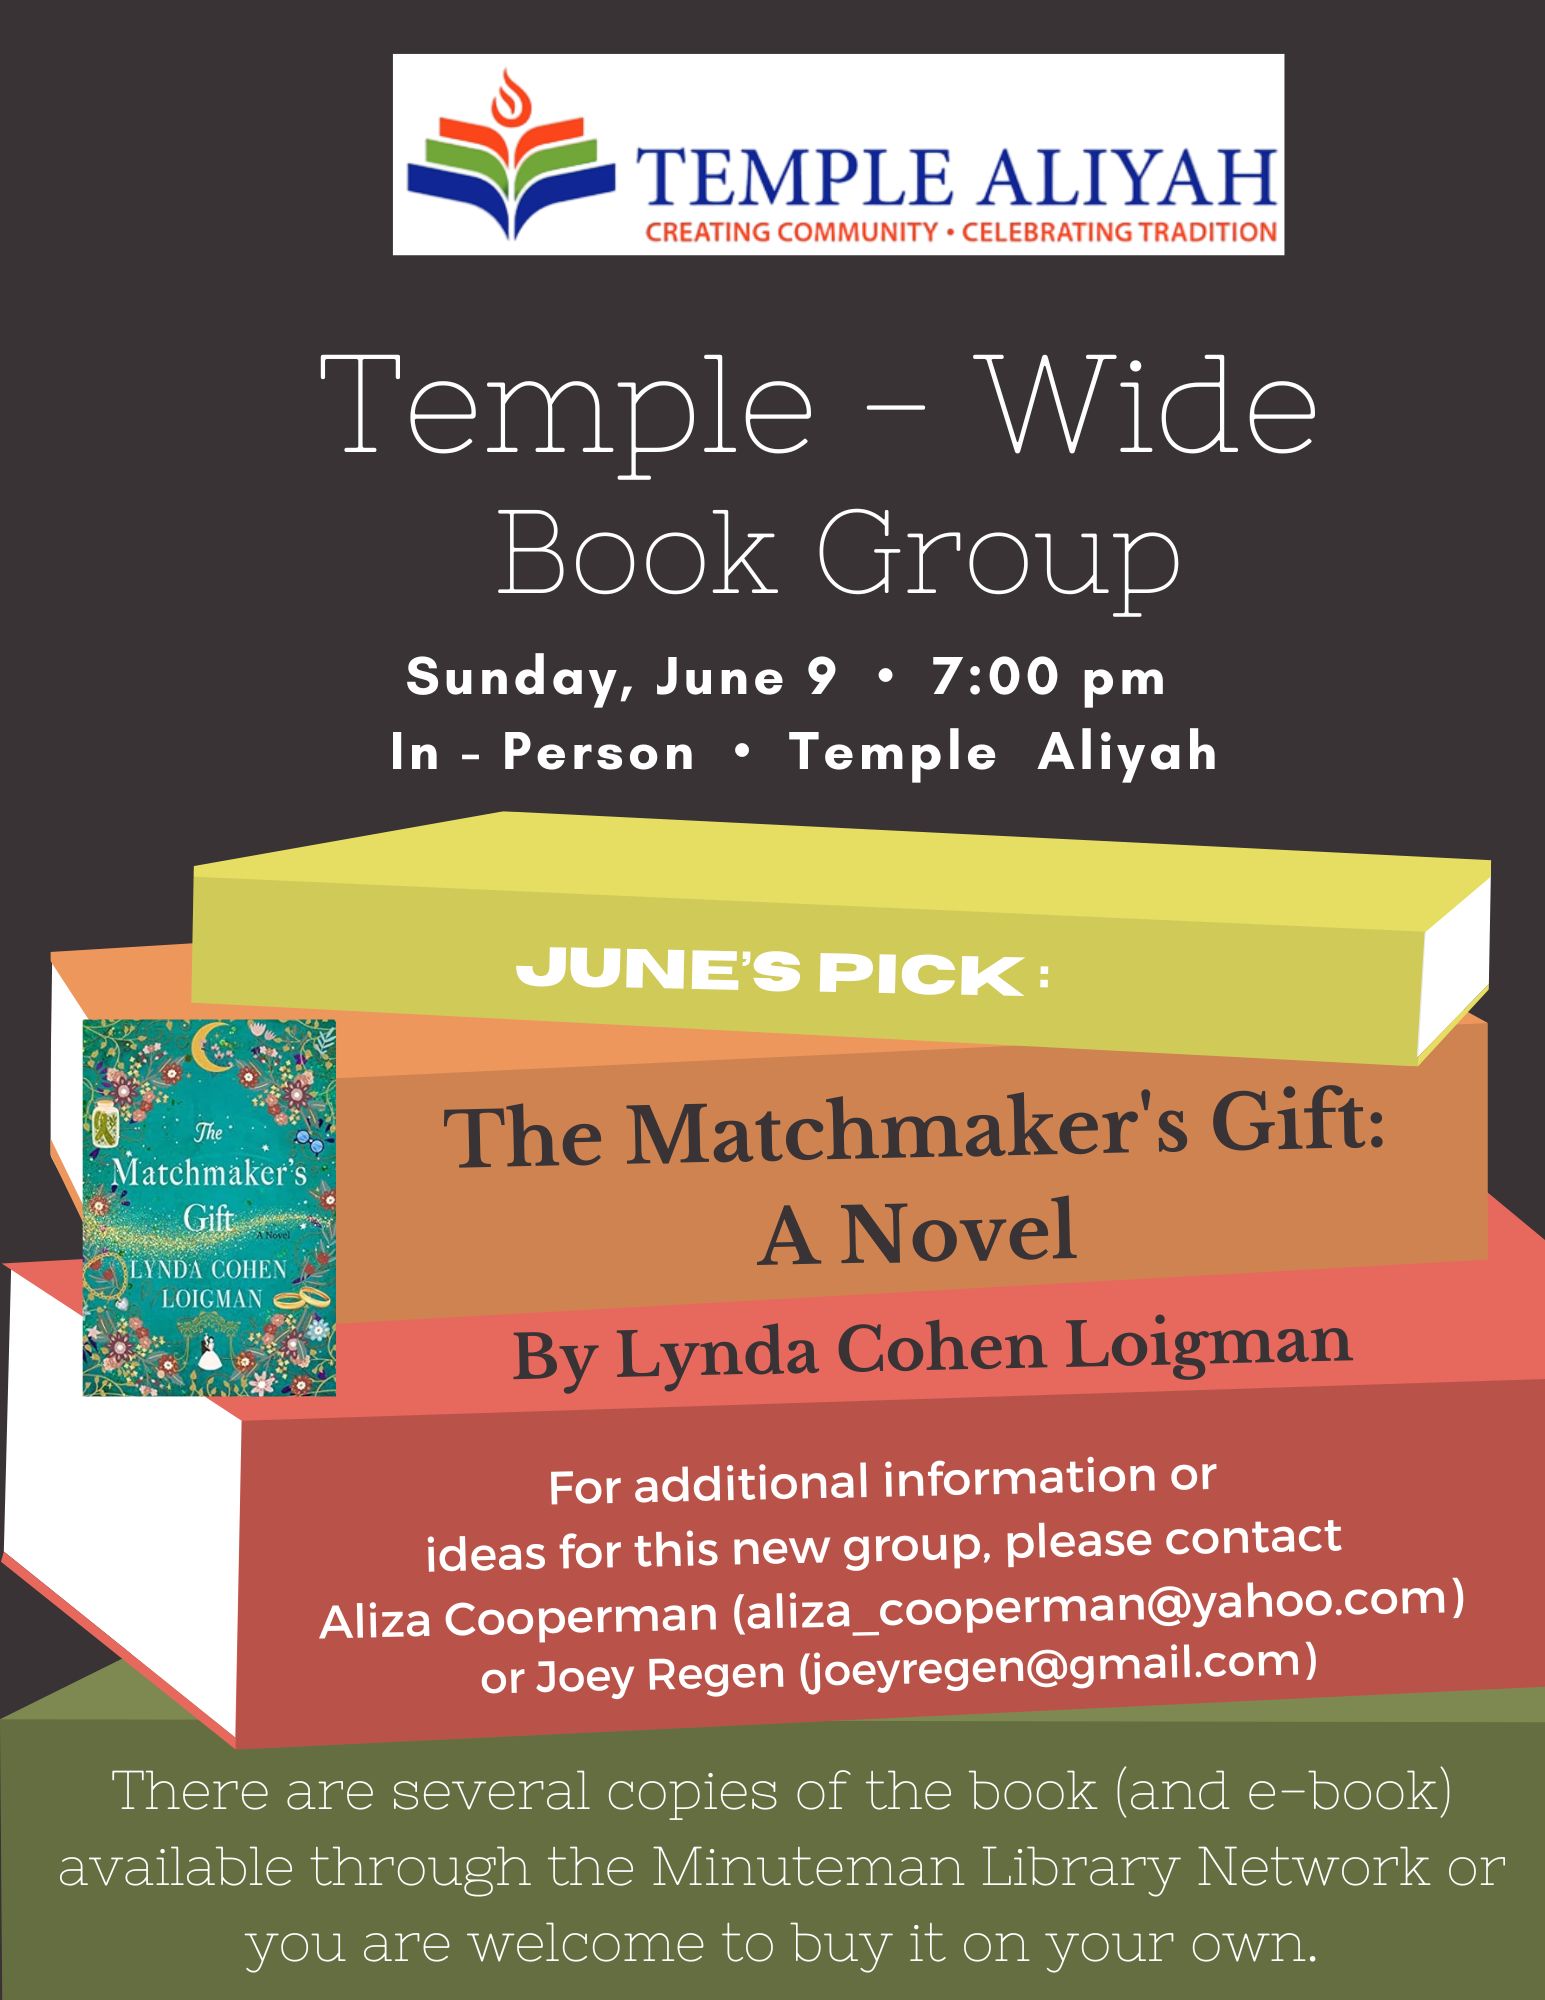 Temple - Wide Book Group